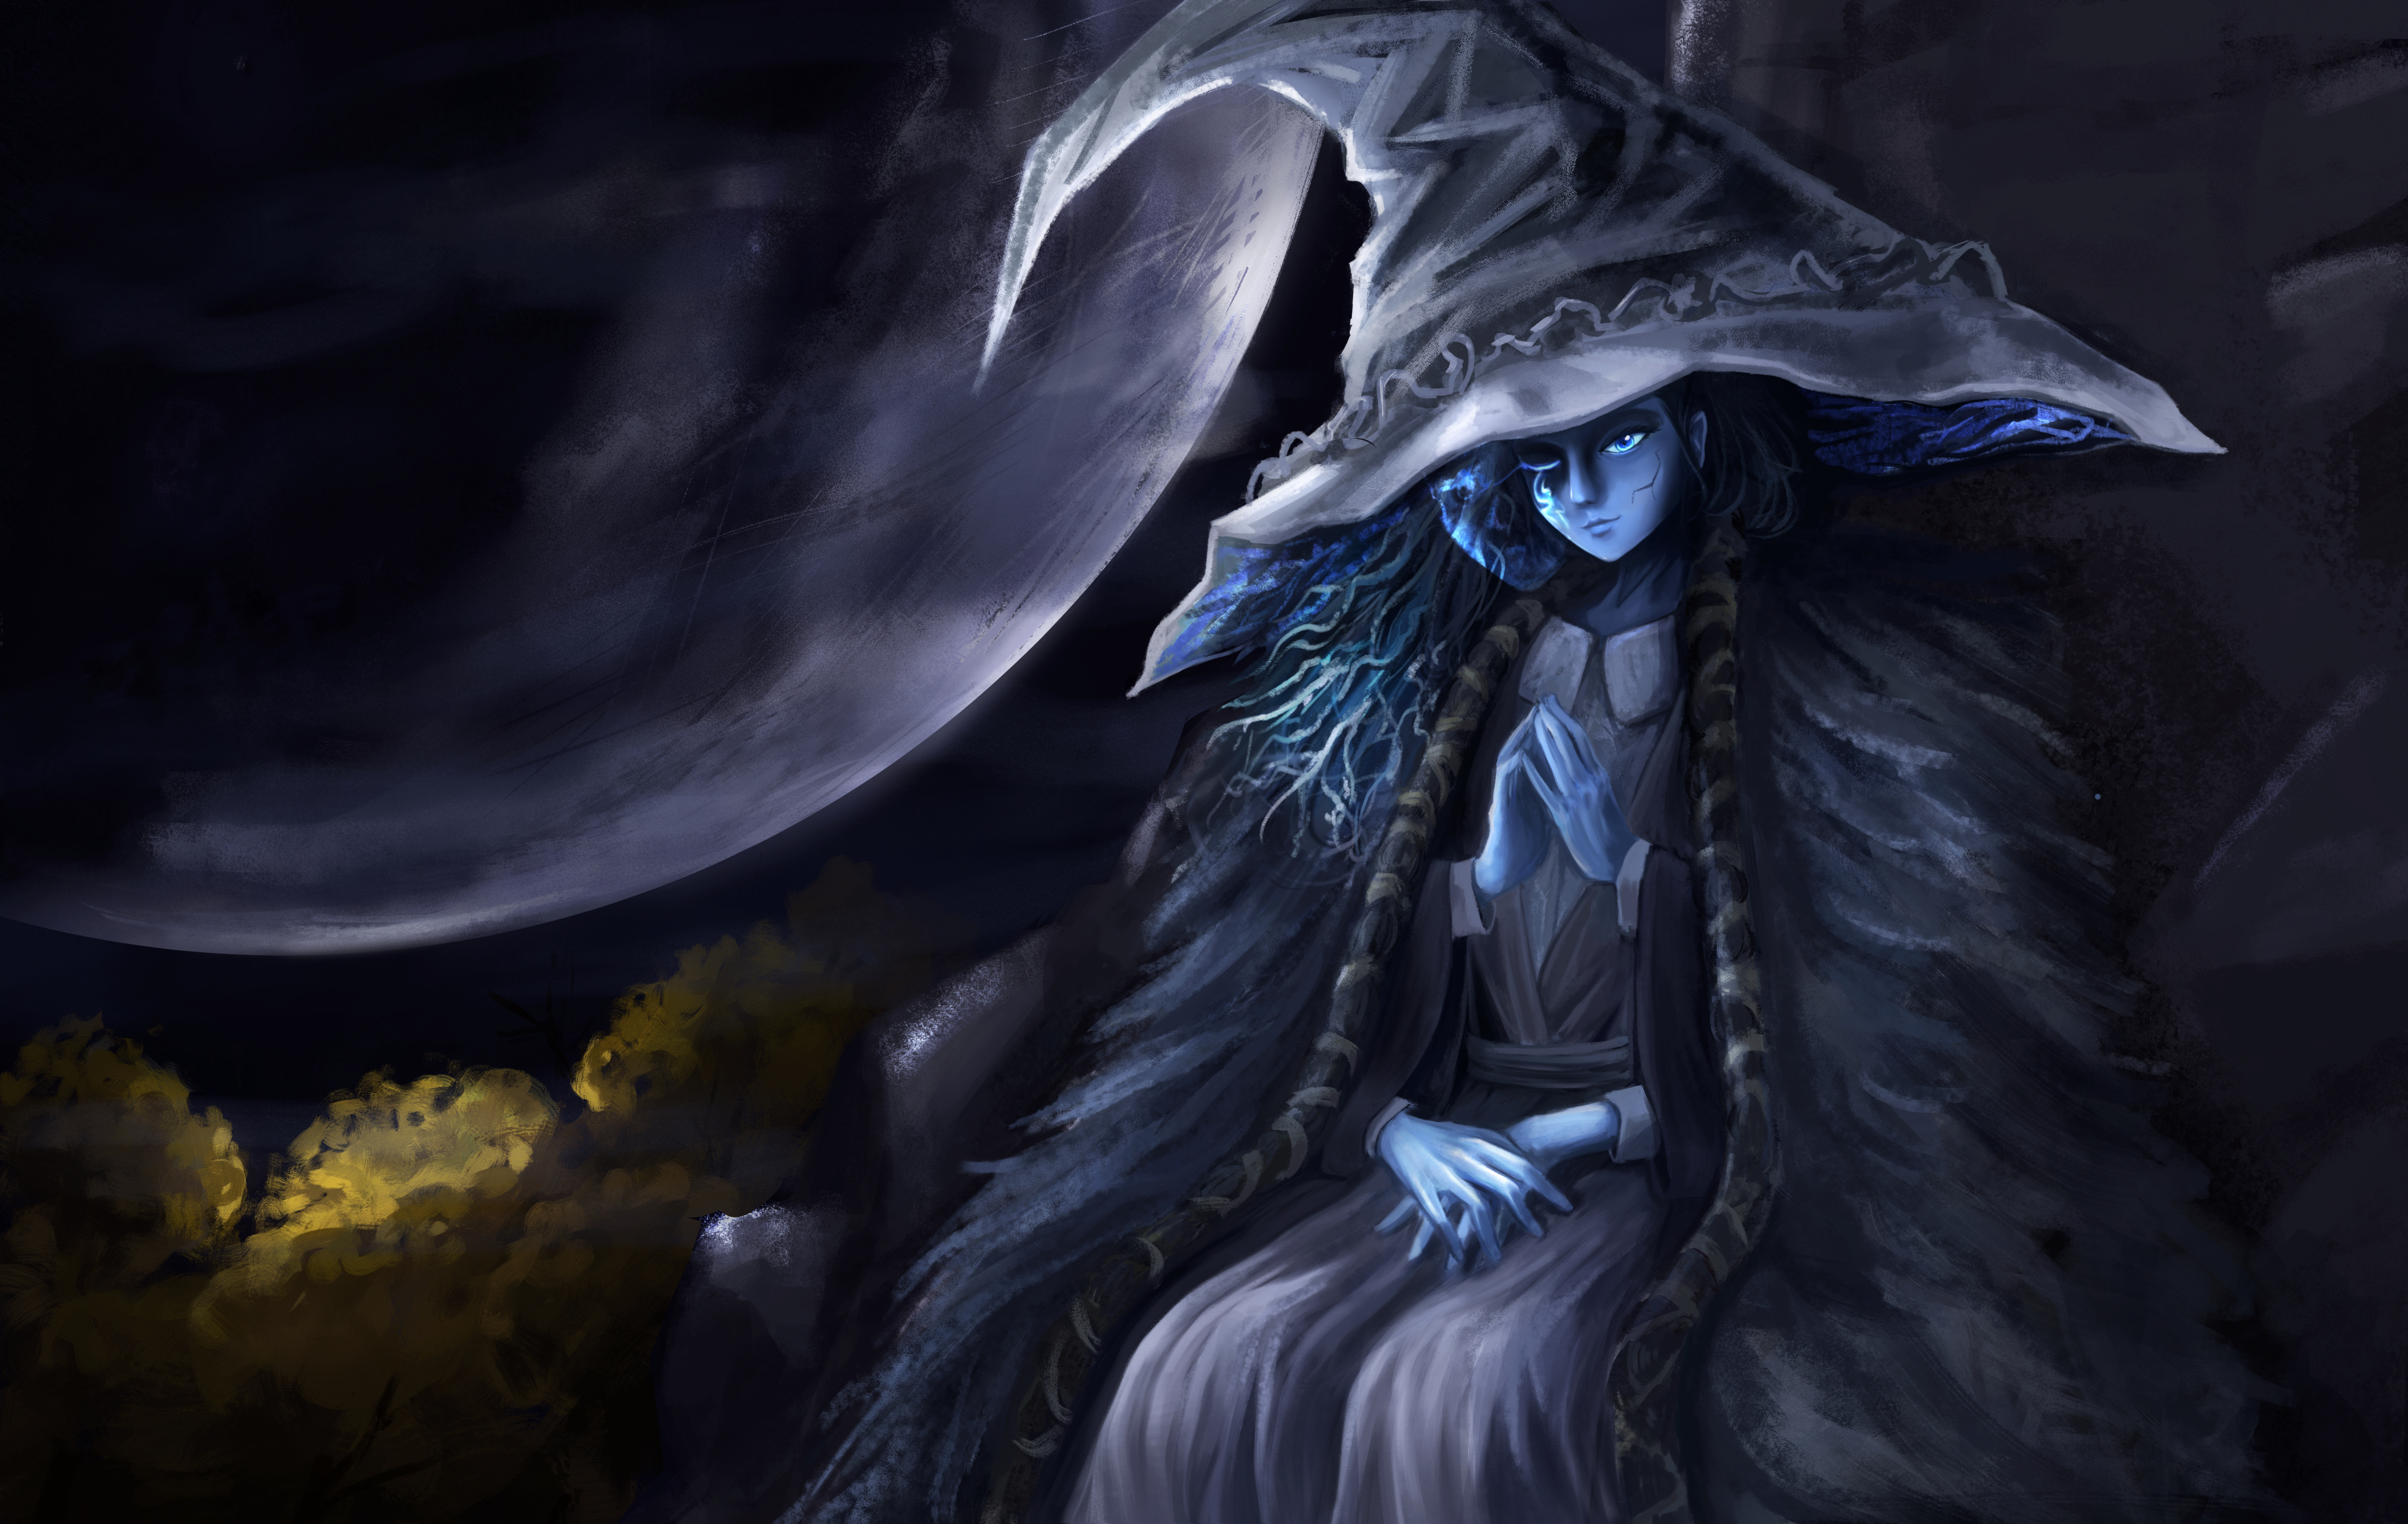 Elden Ring Ranni The Witch Wallpapers - Wallpaper Cave